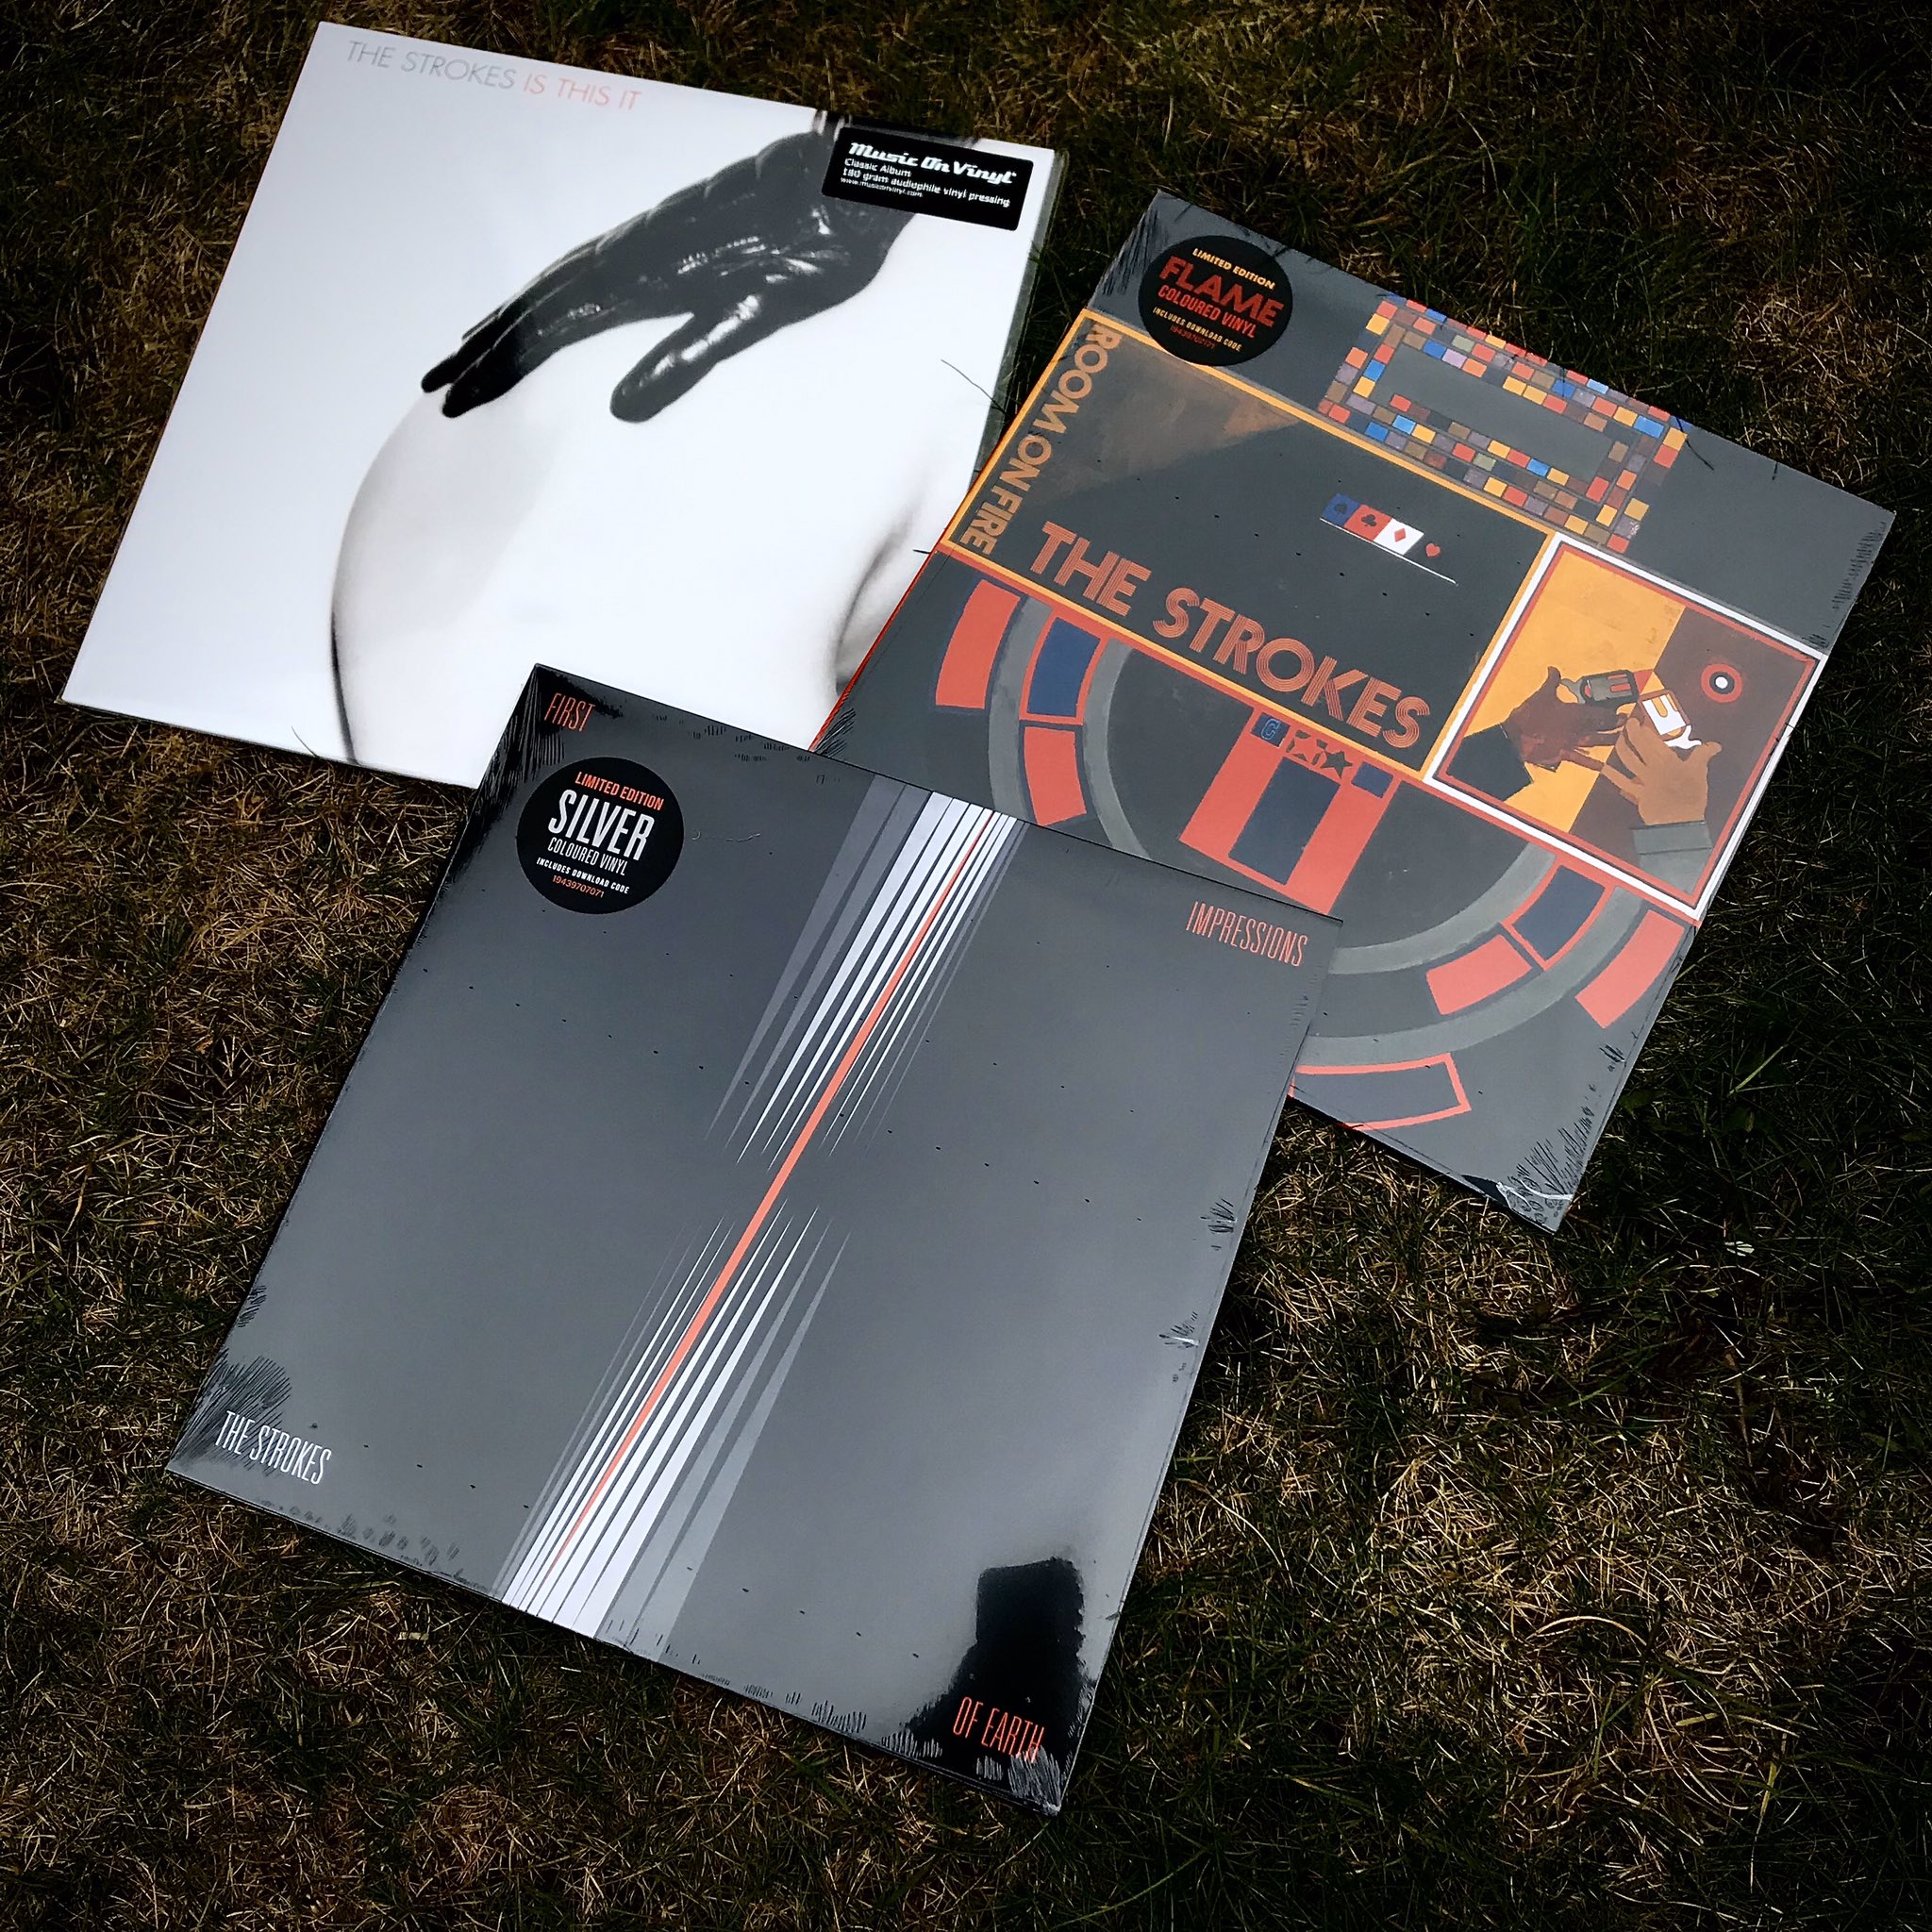 Bear Tree Records on Twitter: anticipation of The Strokes new album being released next we've just had these arrive! -180 gram of Is This It with the original artwork -Ltd '